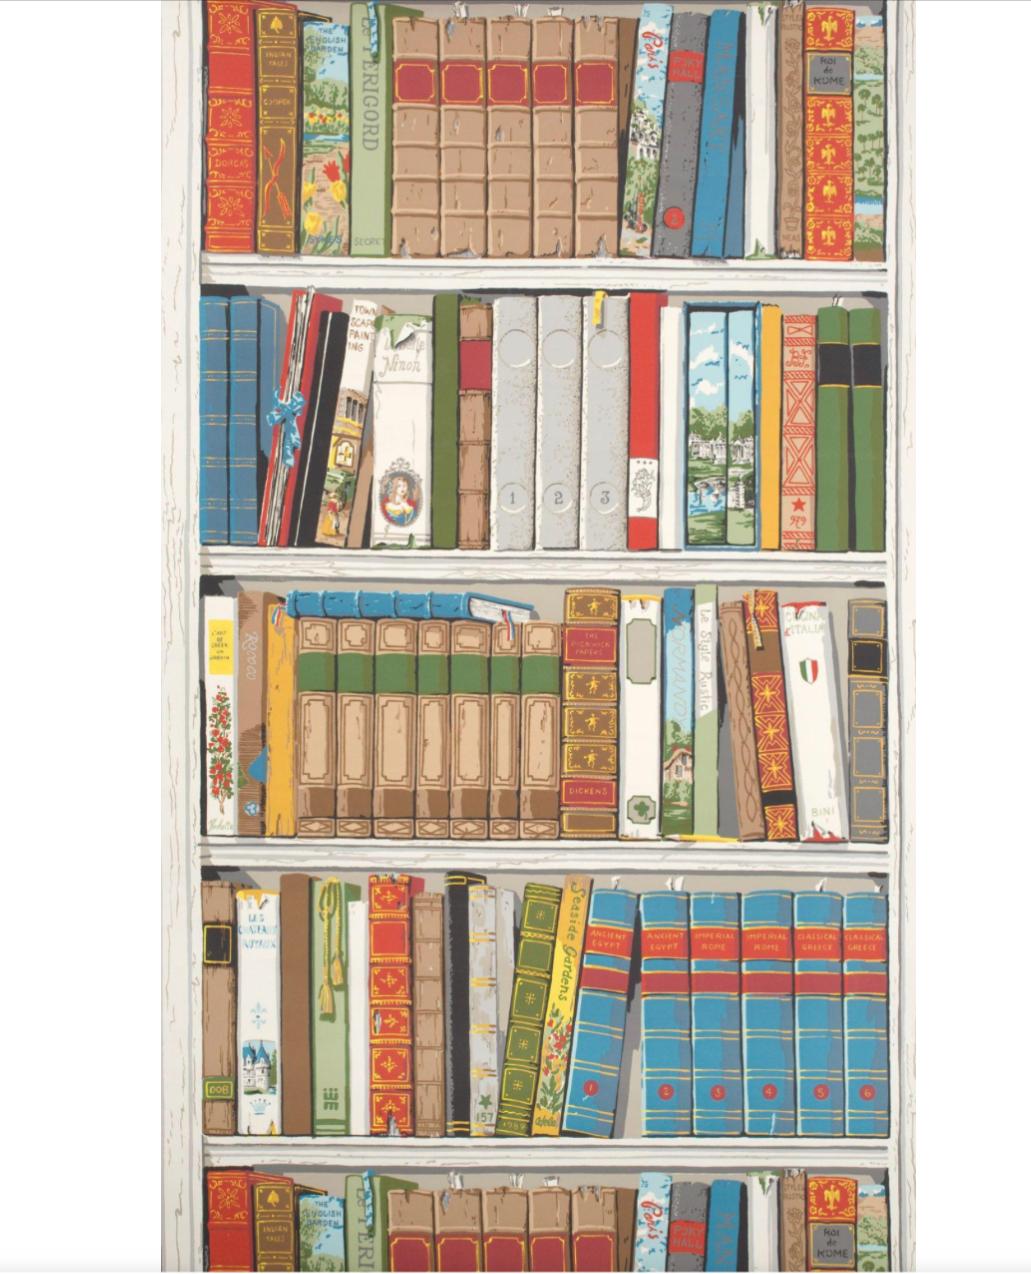 Brunschwig and Fils Les Biblioteques multi-color library hand-printed wallpaper. Gorgeous, colorful modernist take on the troupe l’oeil tradition. MSRP for a double roll: 1726.20 USD

Measures: Repeat vertical 41.5”
Repeat horizontal